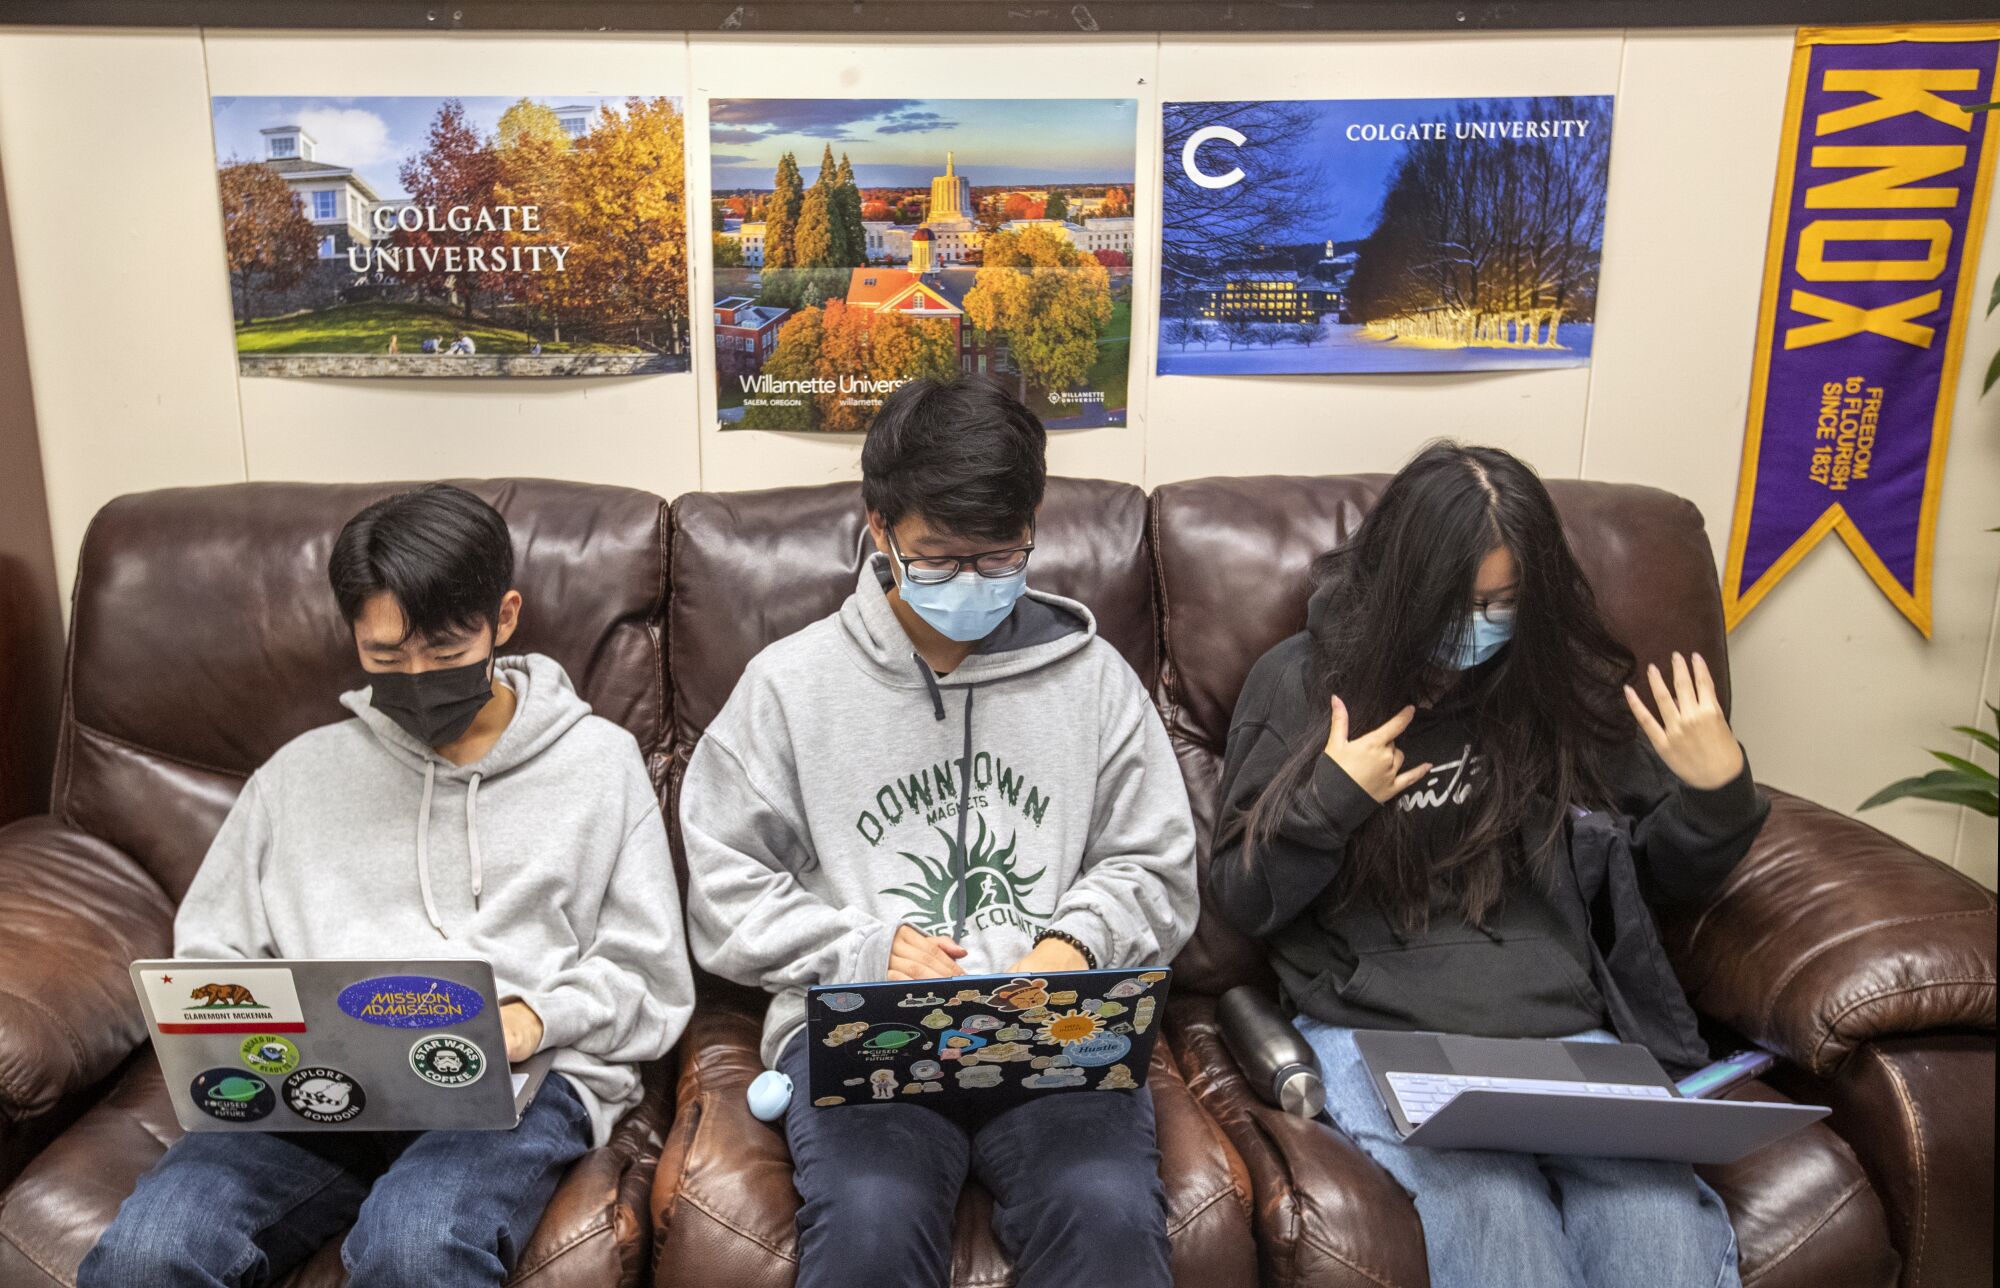 Three students work on their college applications on laptops while sitting on a brown couch.